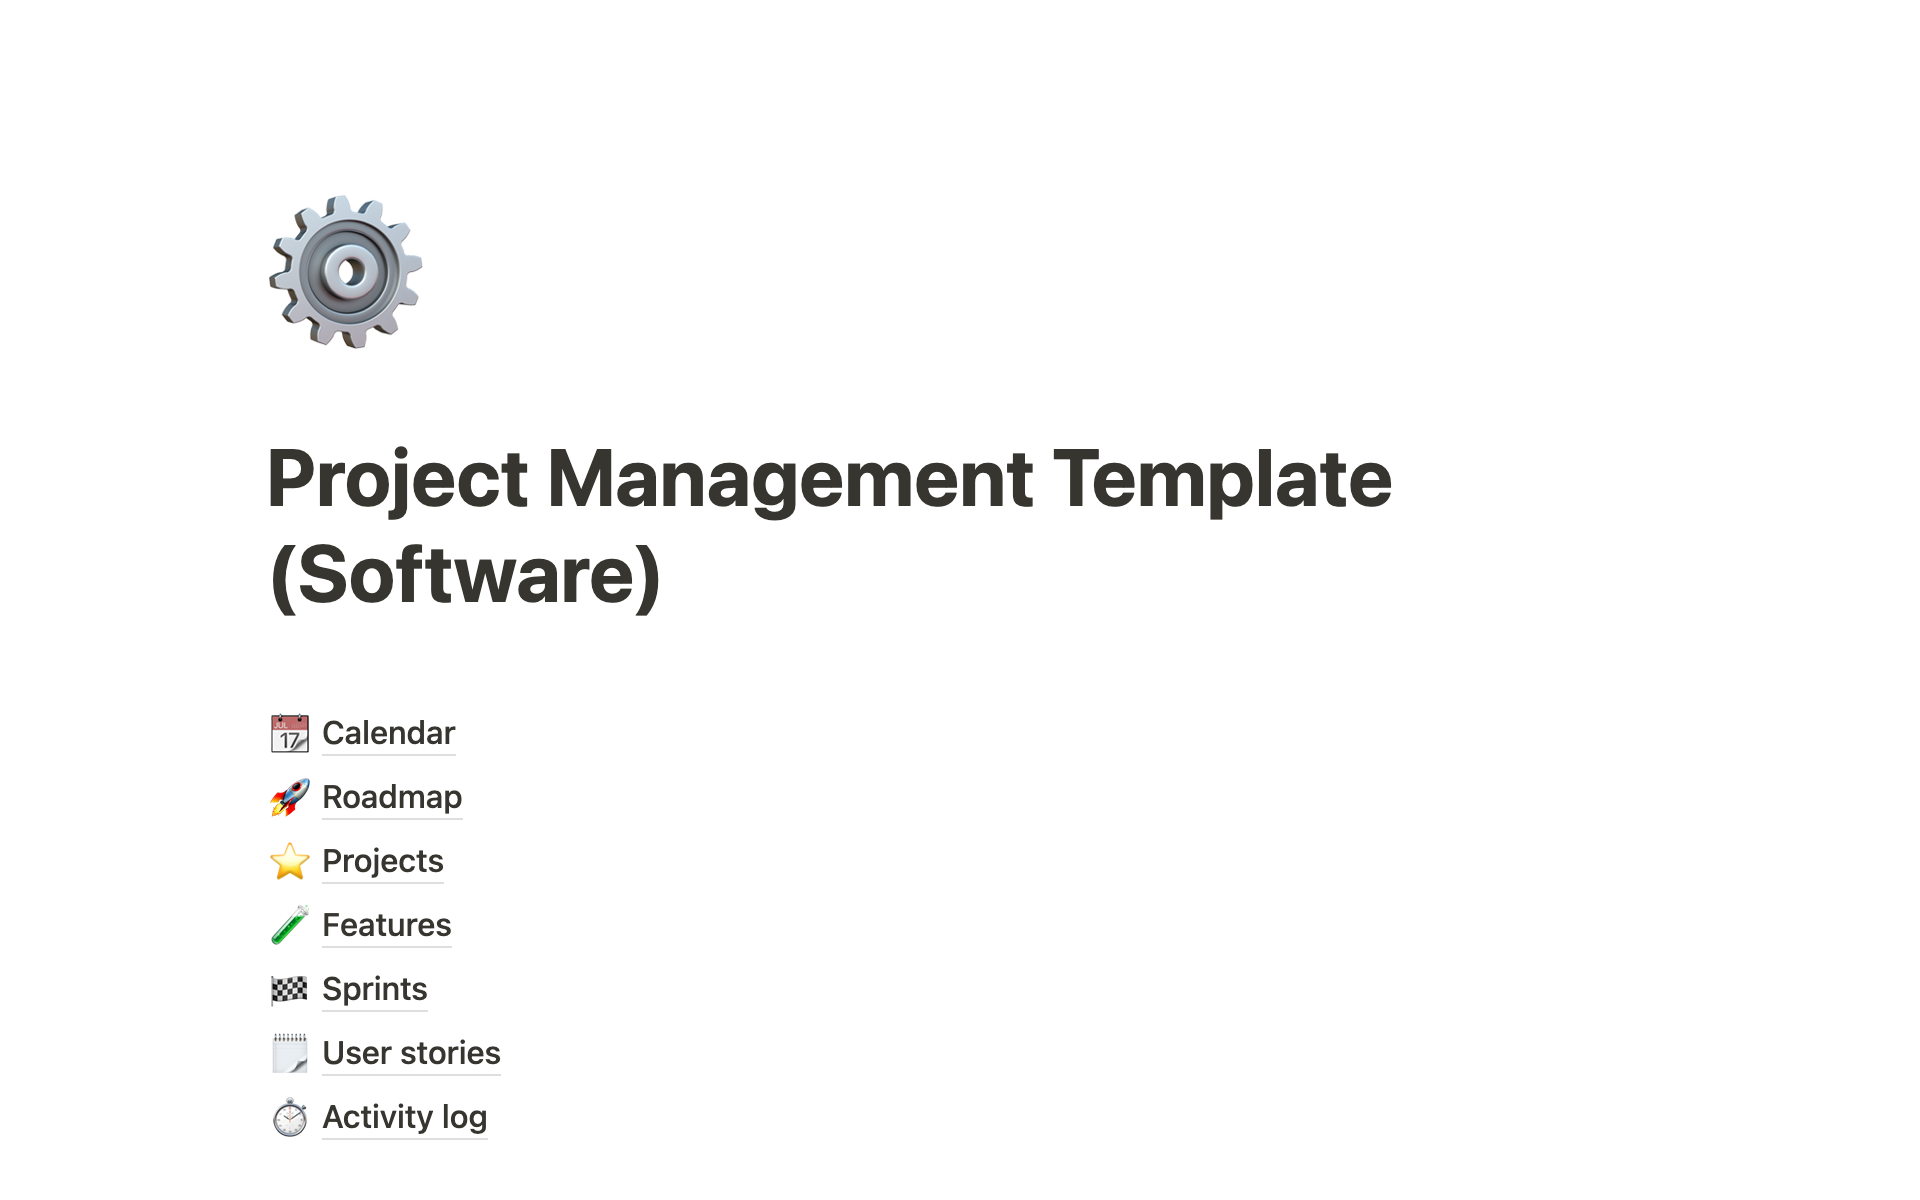 Organize your team & software project